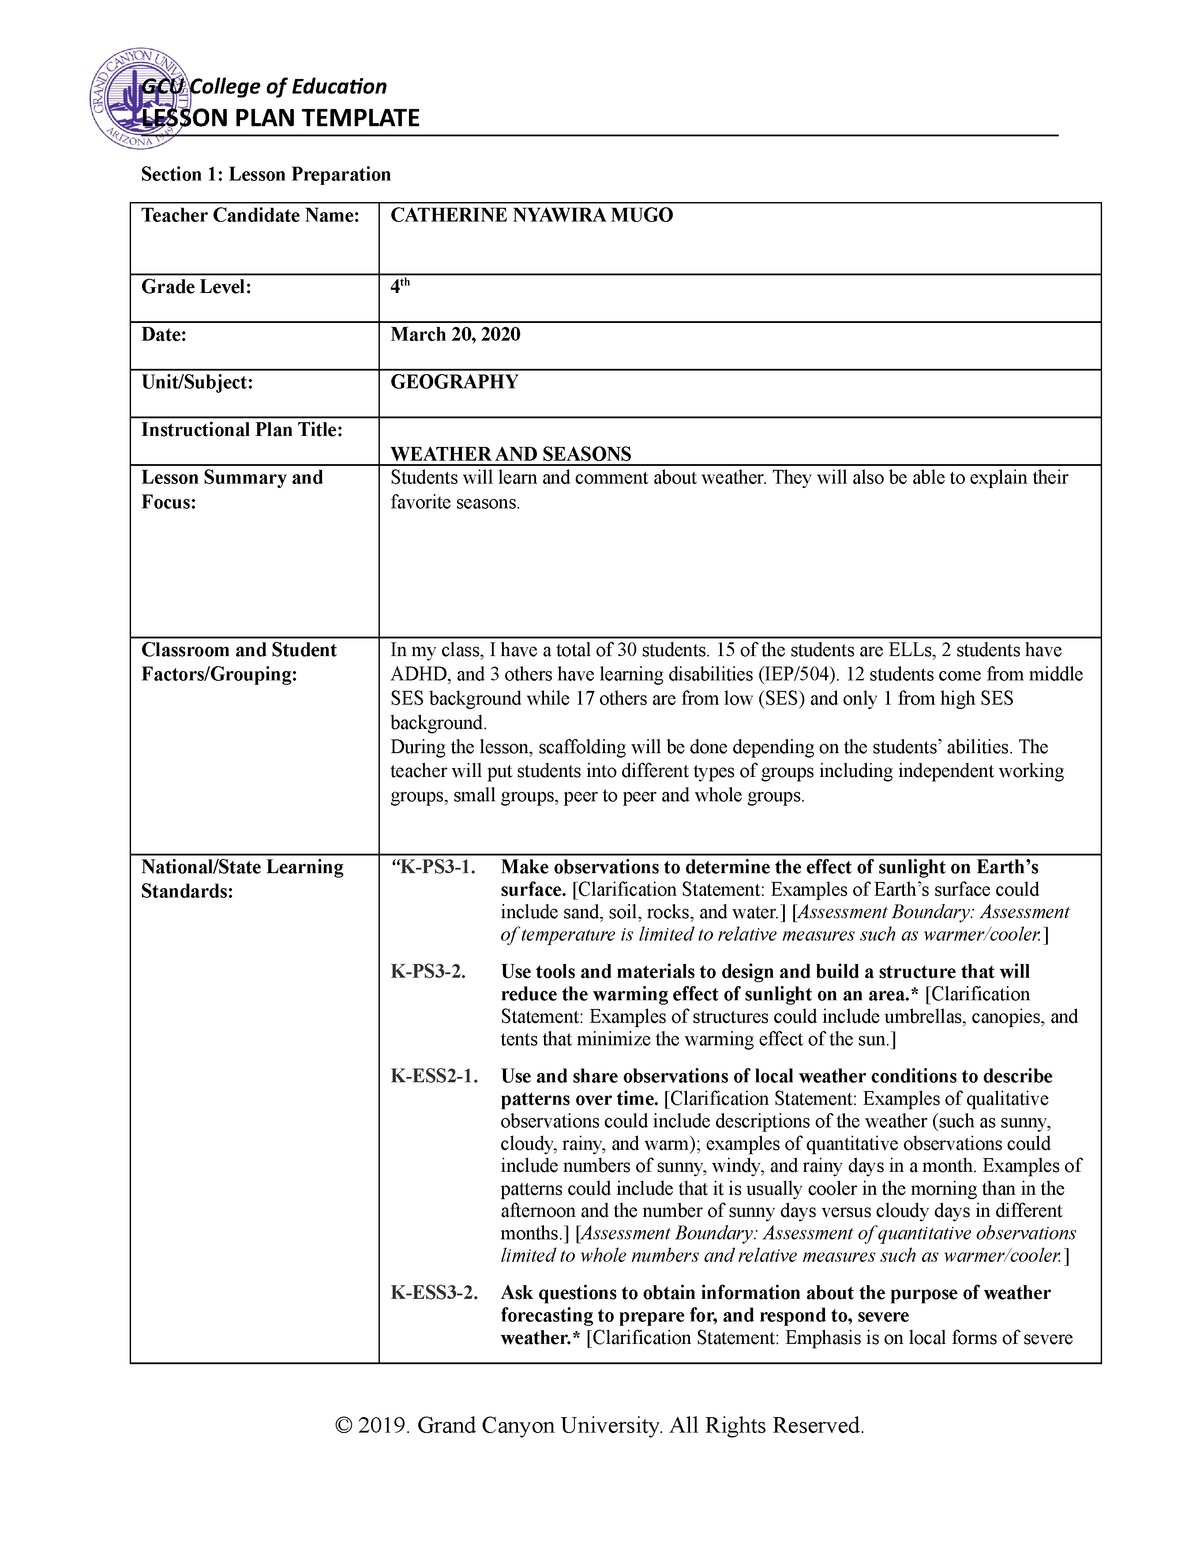 Lesson Plan For Obsevation A Detailed Lesson Plan In Grade